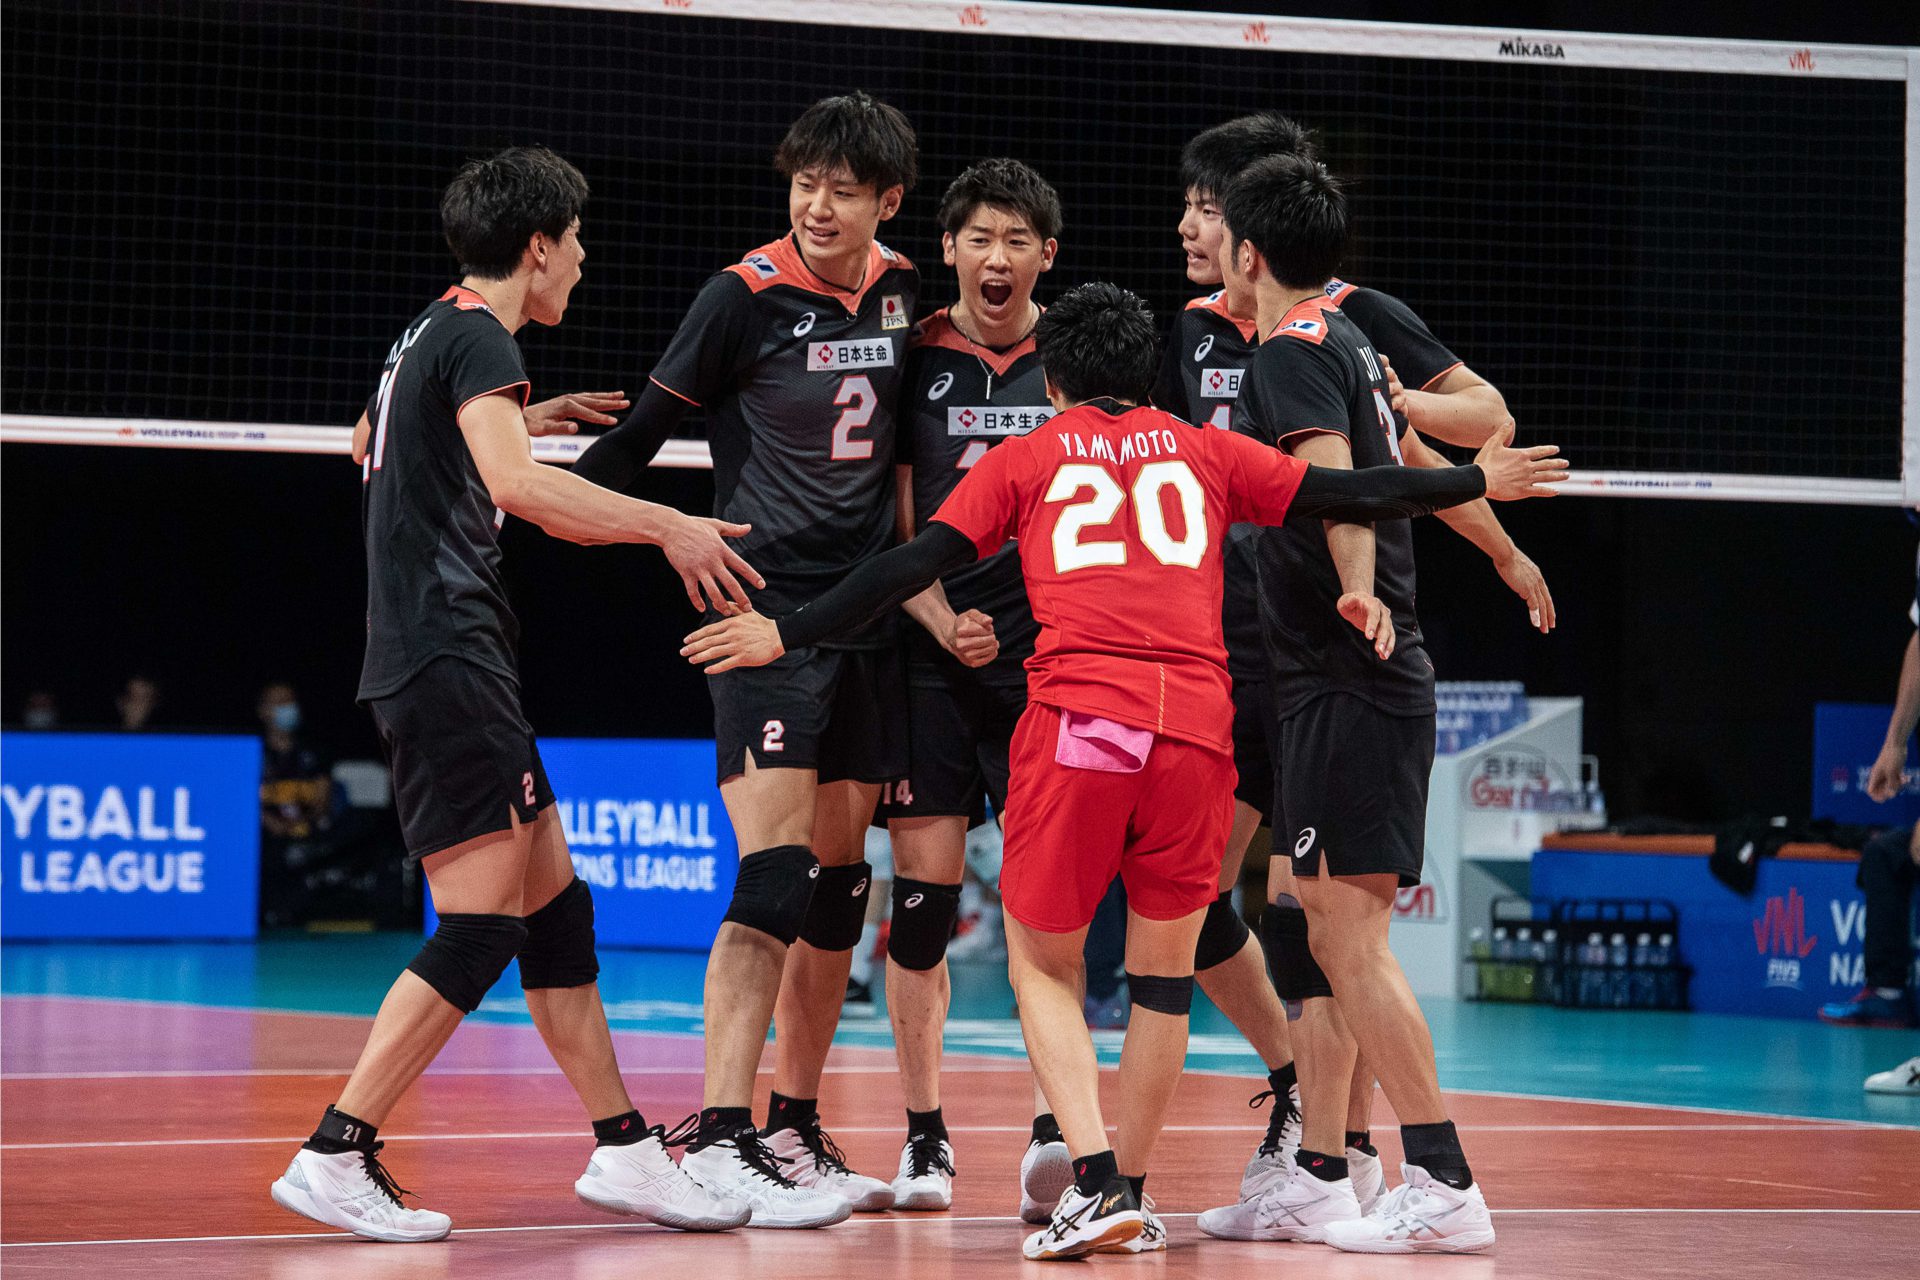 RI HAKU: “WE FOCUS ON ONE GAME AT A TIME” – Asian Volleyball Confederation